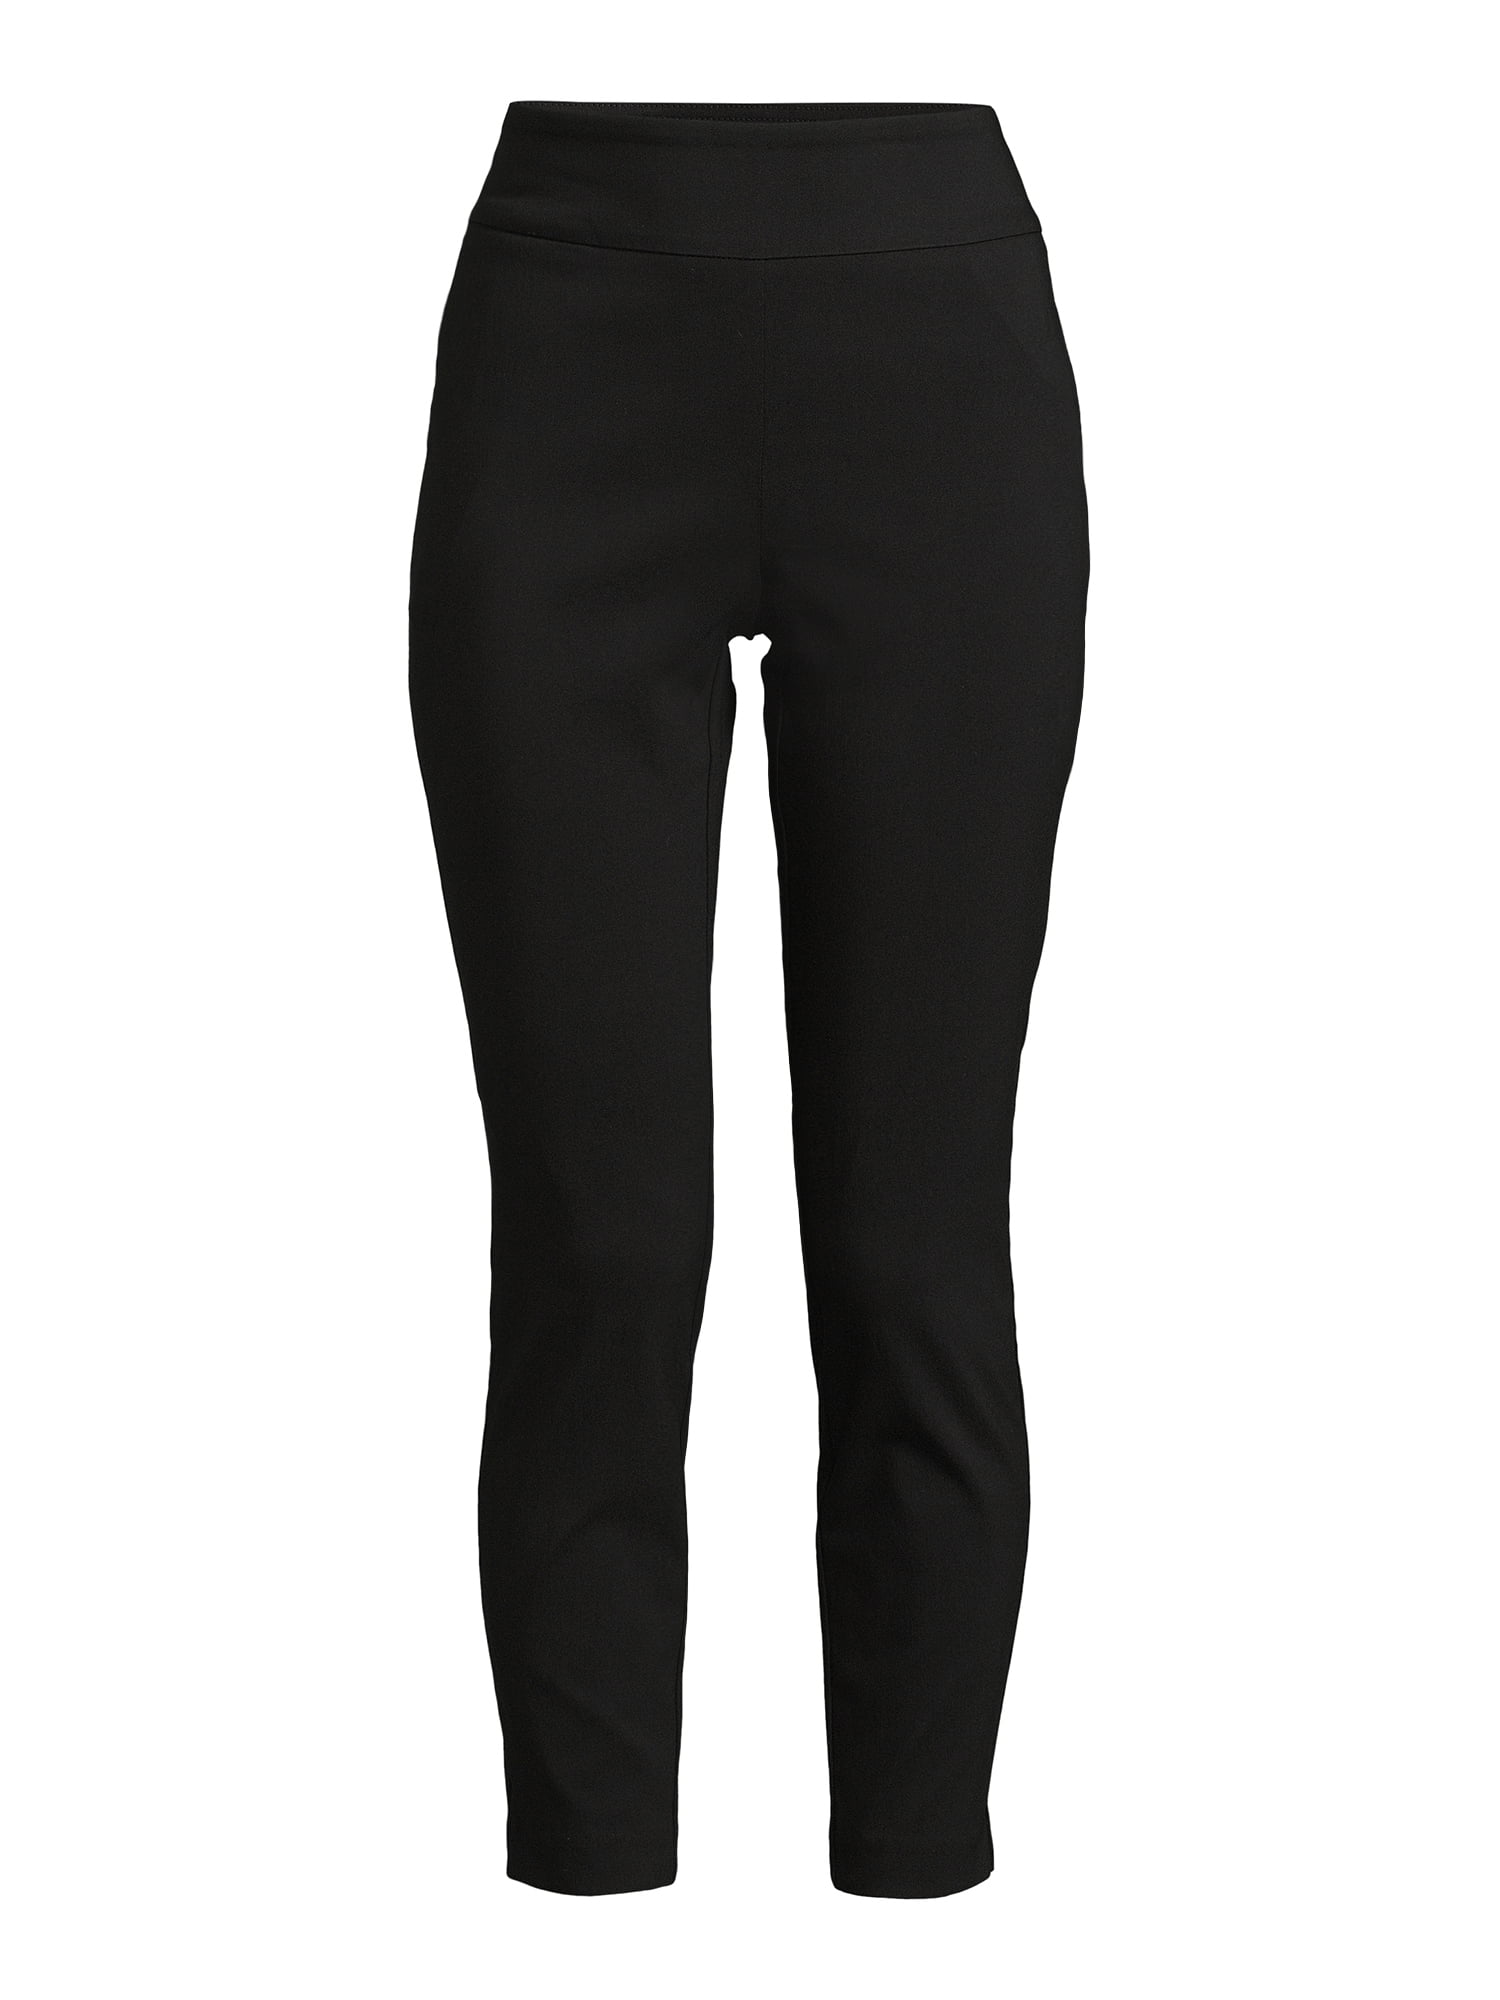 SLIM PULL ON PANT BLACK 14 – Beyond the Alley Boutique